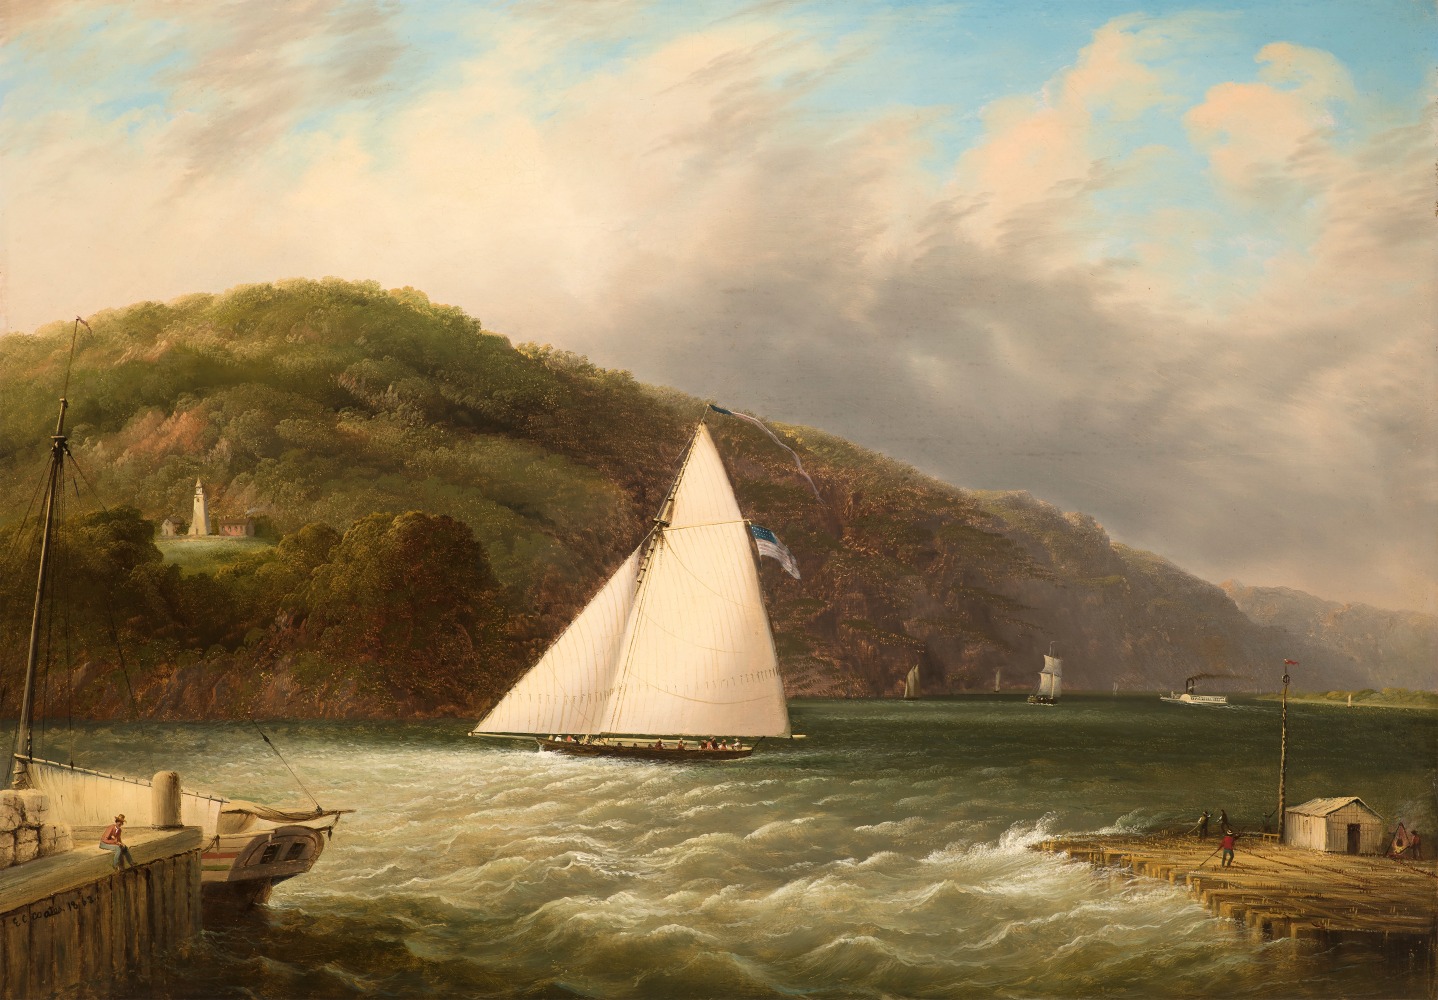 Edmund C. Coates (1816–1871), Yachting on the Hudson, 1863, oil on canvas, 24 x 34 in., signed and dated lower left: E.C. Coates 1863